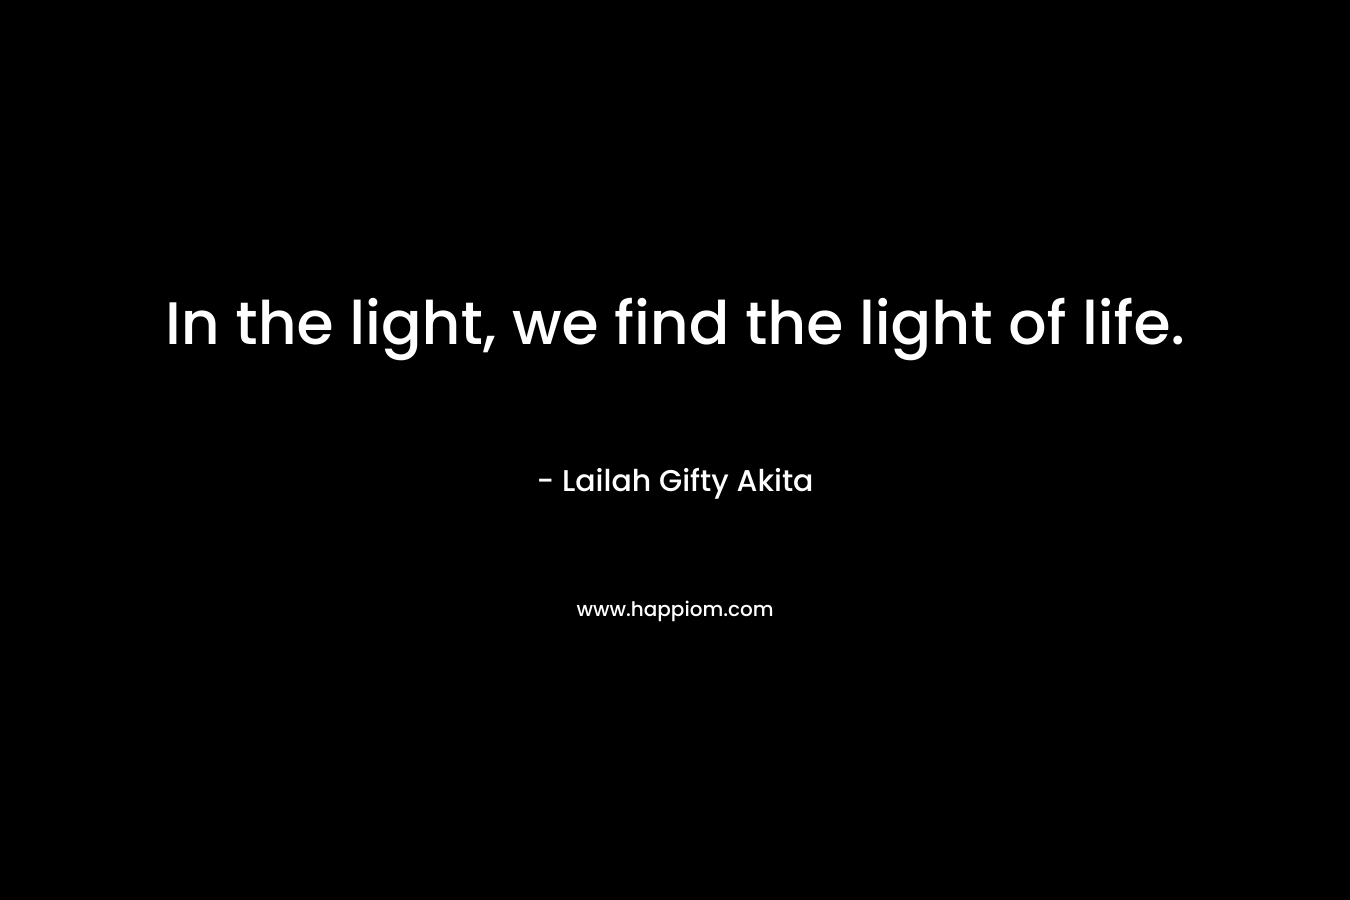 In the light, we find the light of life.